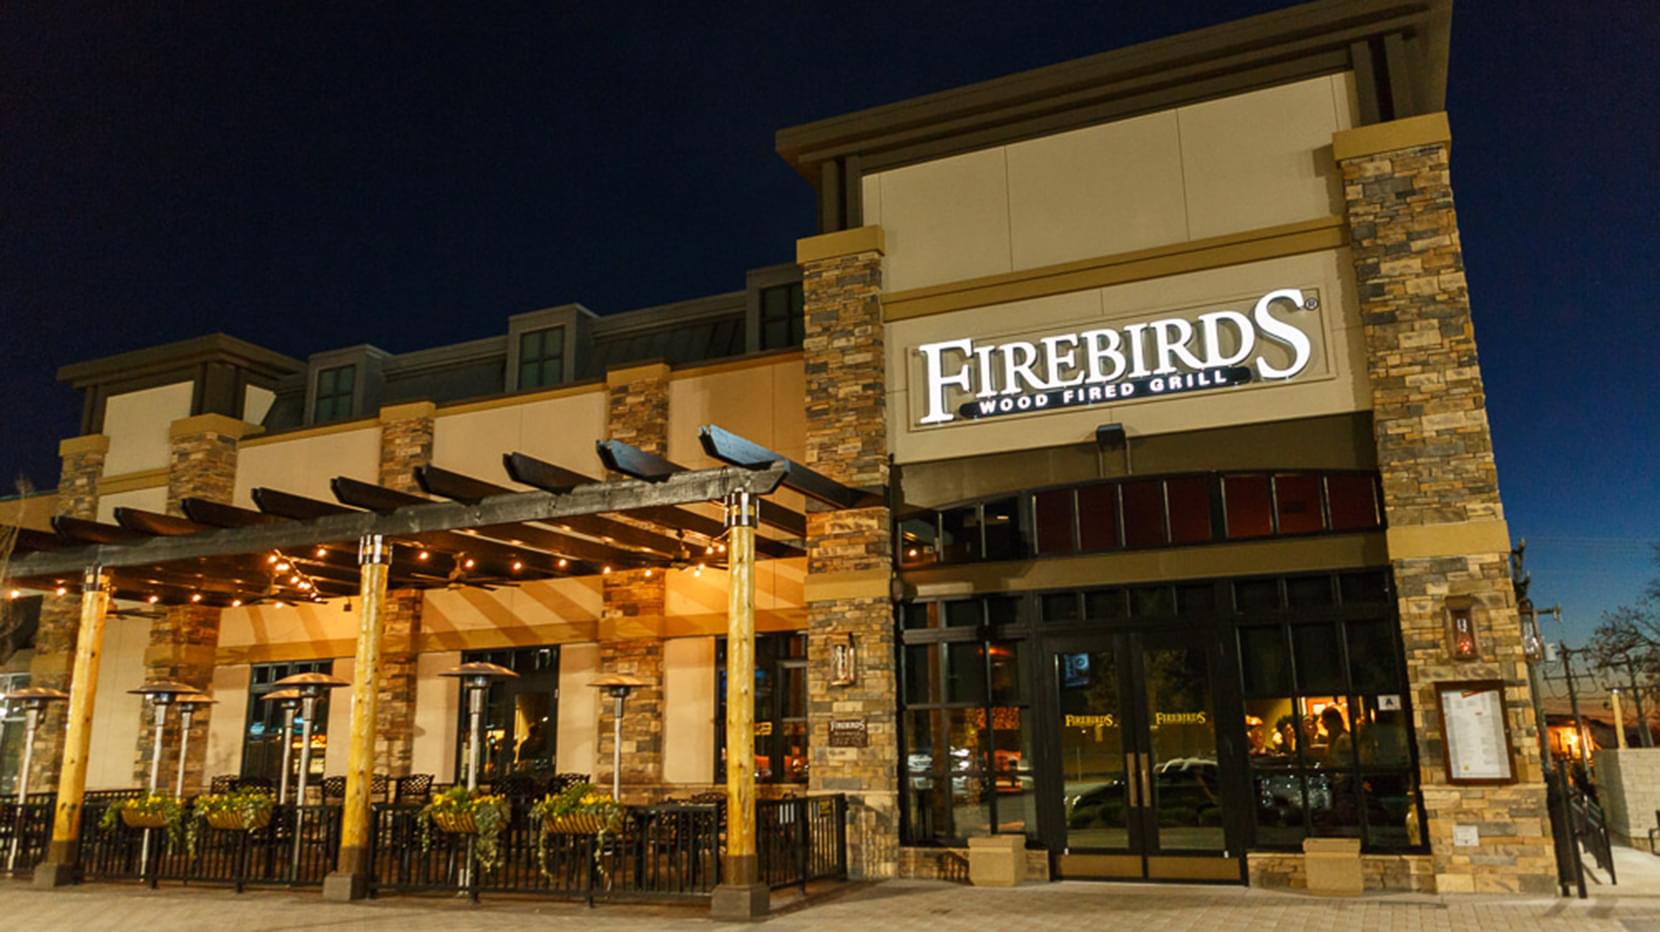 Exterior of Firebirds Wood Fired Grill in Greenville, SC